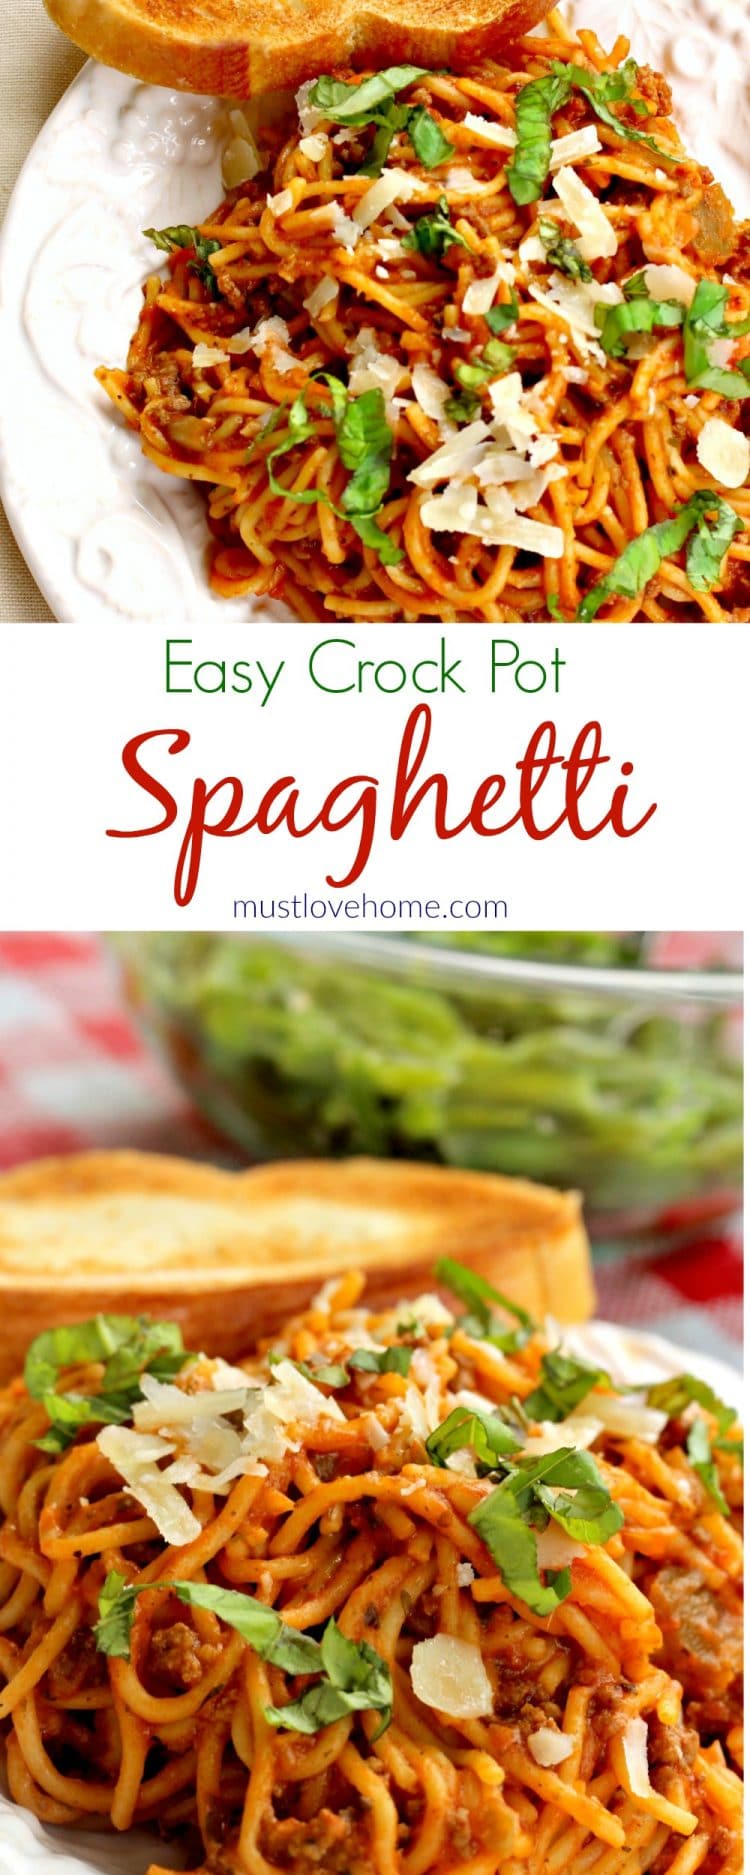 Easy Crock Pot Spaghetti is the real deal - with just beef, pasta , sauce and a few spices it is a cinch to make and full of flavor. This recipe is a definite thumbs up!